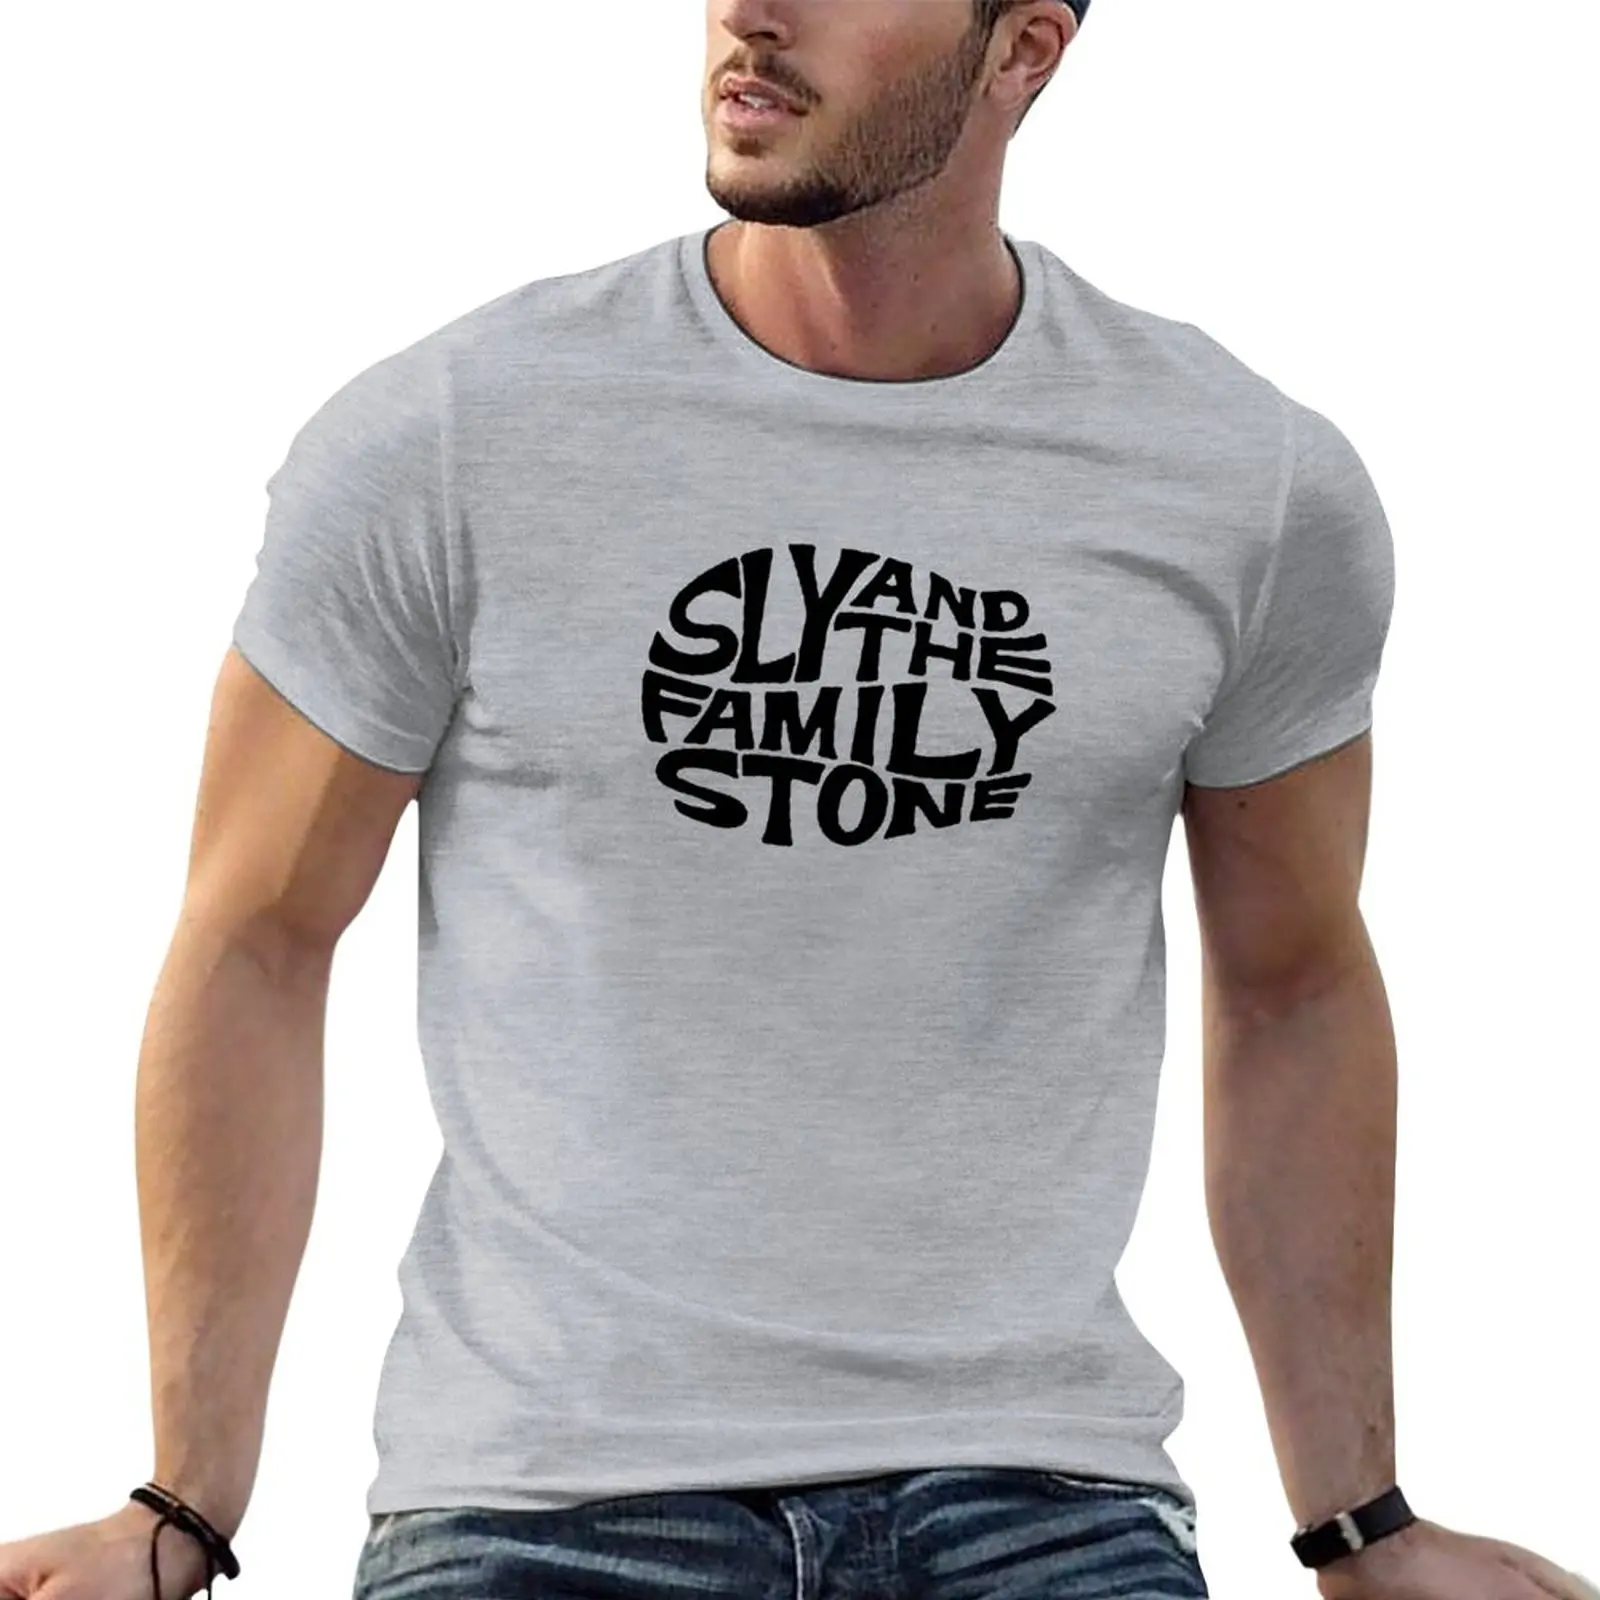 New Sly and the Family Stone T-Shirt summer tops cute tops shirts graphic tees black t-shirts for men hot japanese anime jujutsu kaisen t shirts men kawaii cartoon summer tops t shirt funny manga unisex harajuku graphic tees male